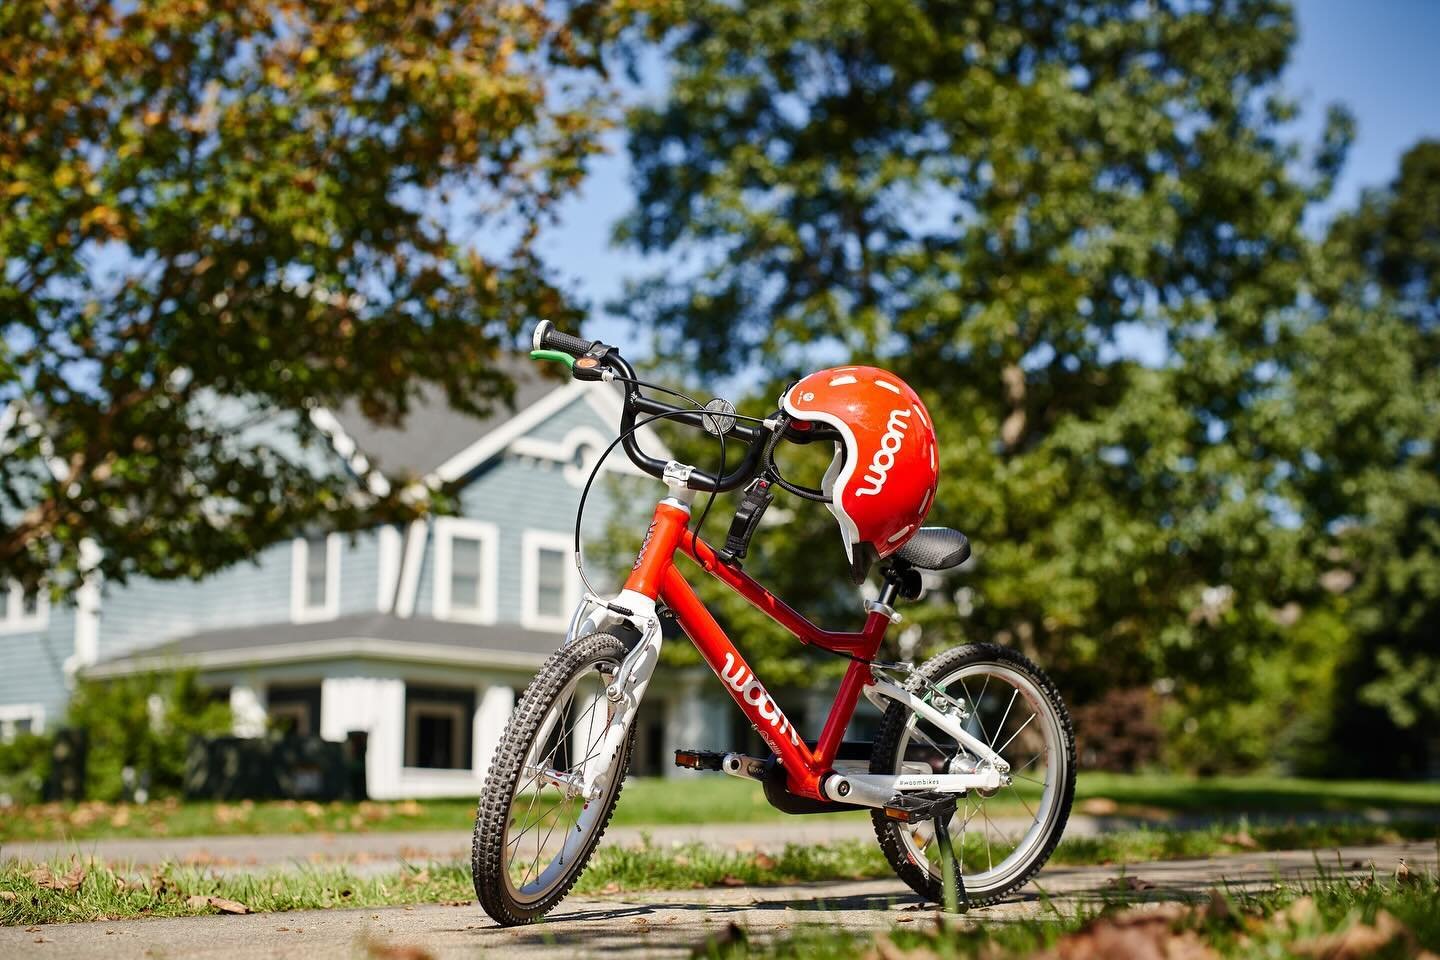 💥 Excited that we now carry @woombikes at ACME. For all the kiddos in your life. Stop by the Katonah shop to take a look at the full lineup. 💥